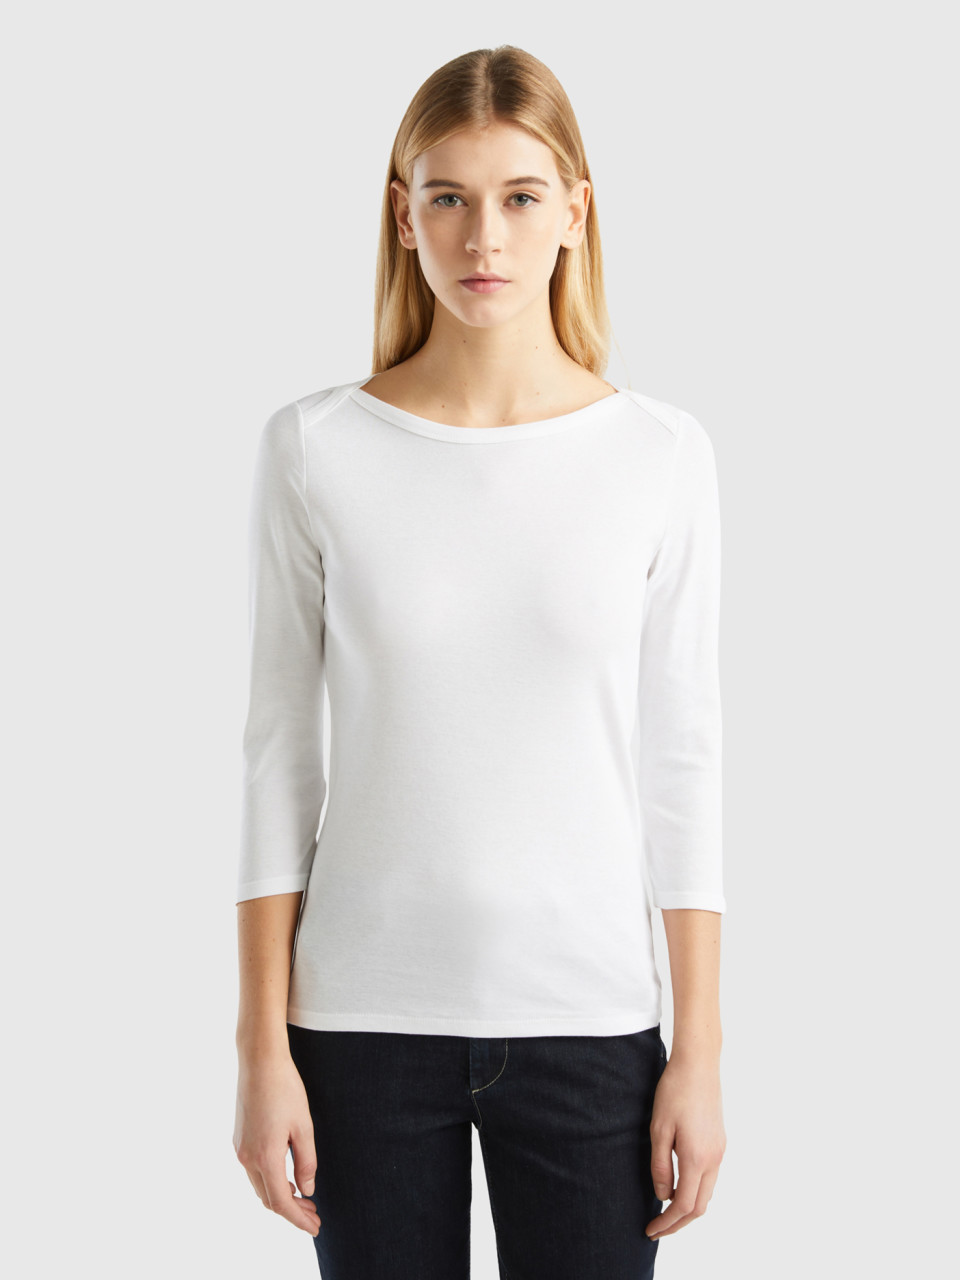 Benetton, T-shirt With Boat Neck In 100% Cotton, White, Women